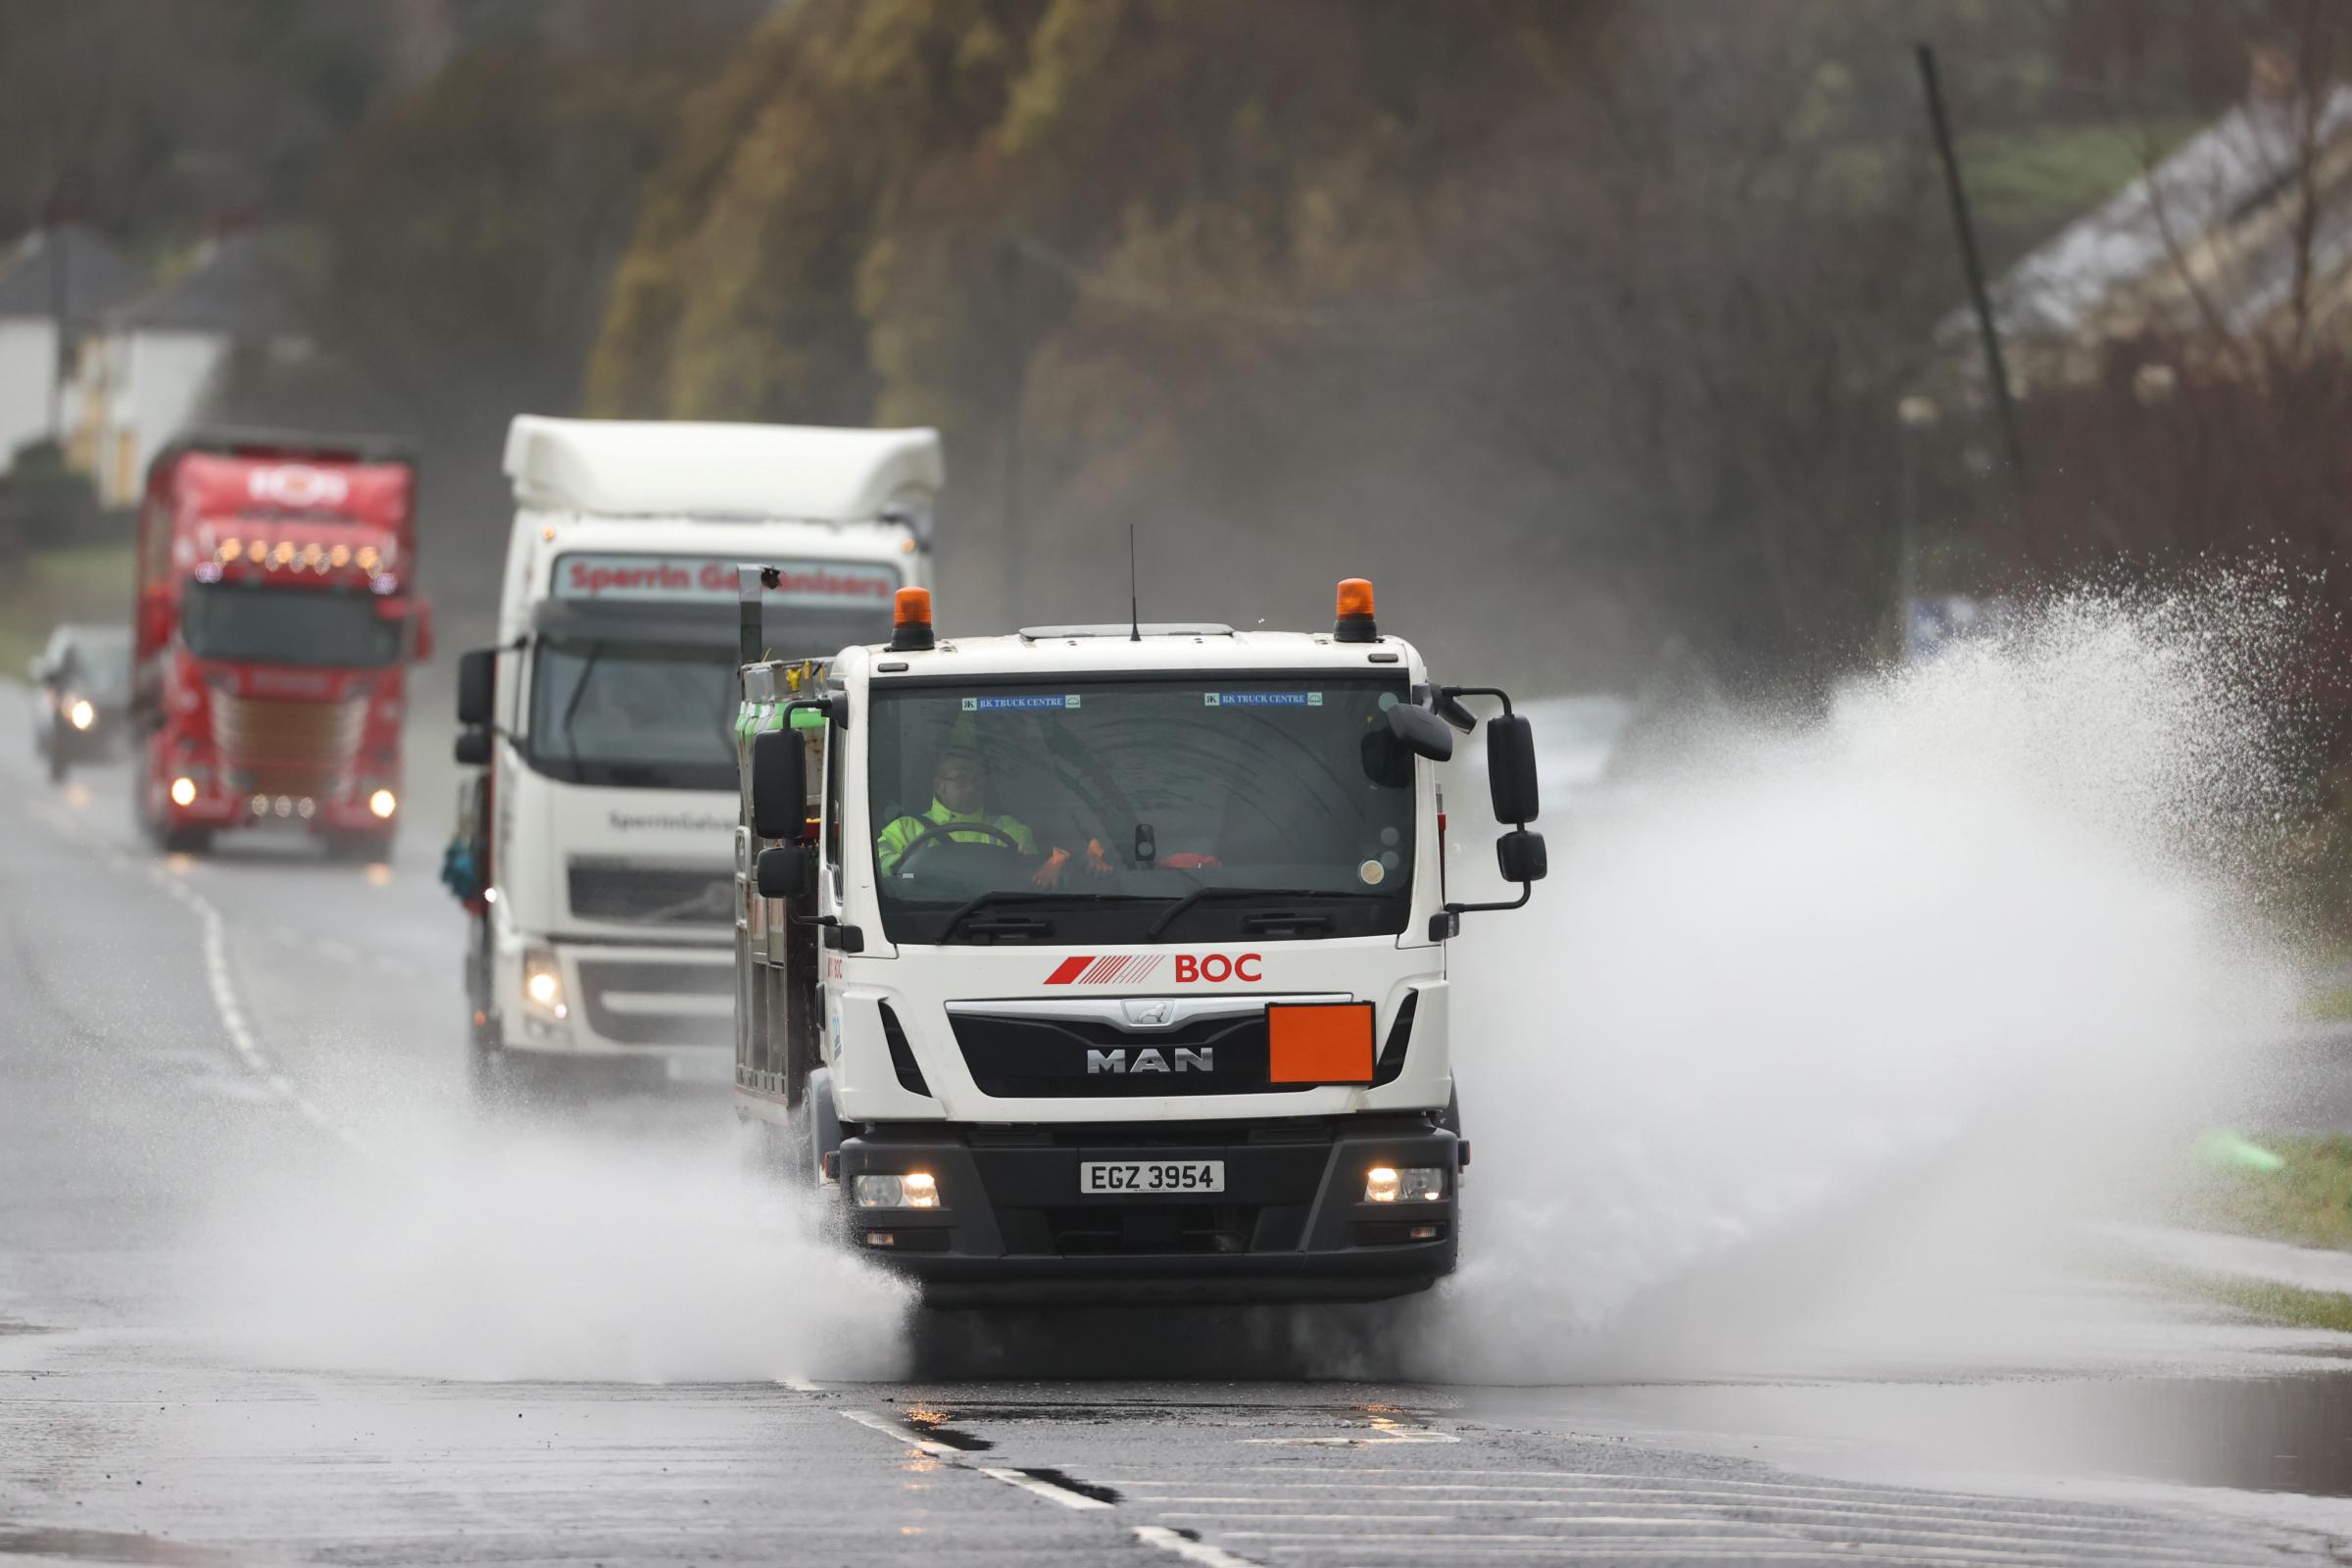 Storm Barra: Flood warnings and alerts issued by SEPA as heavy rain and wind batter Scotland